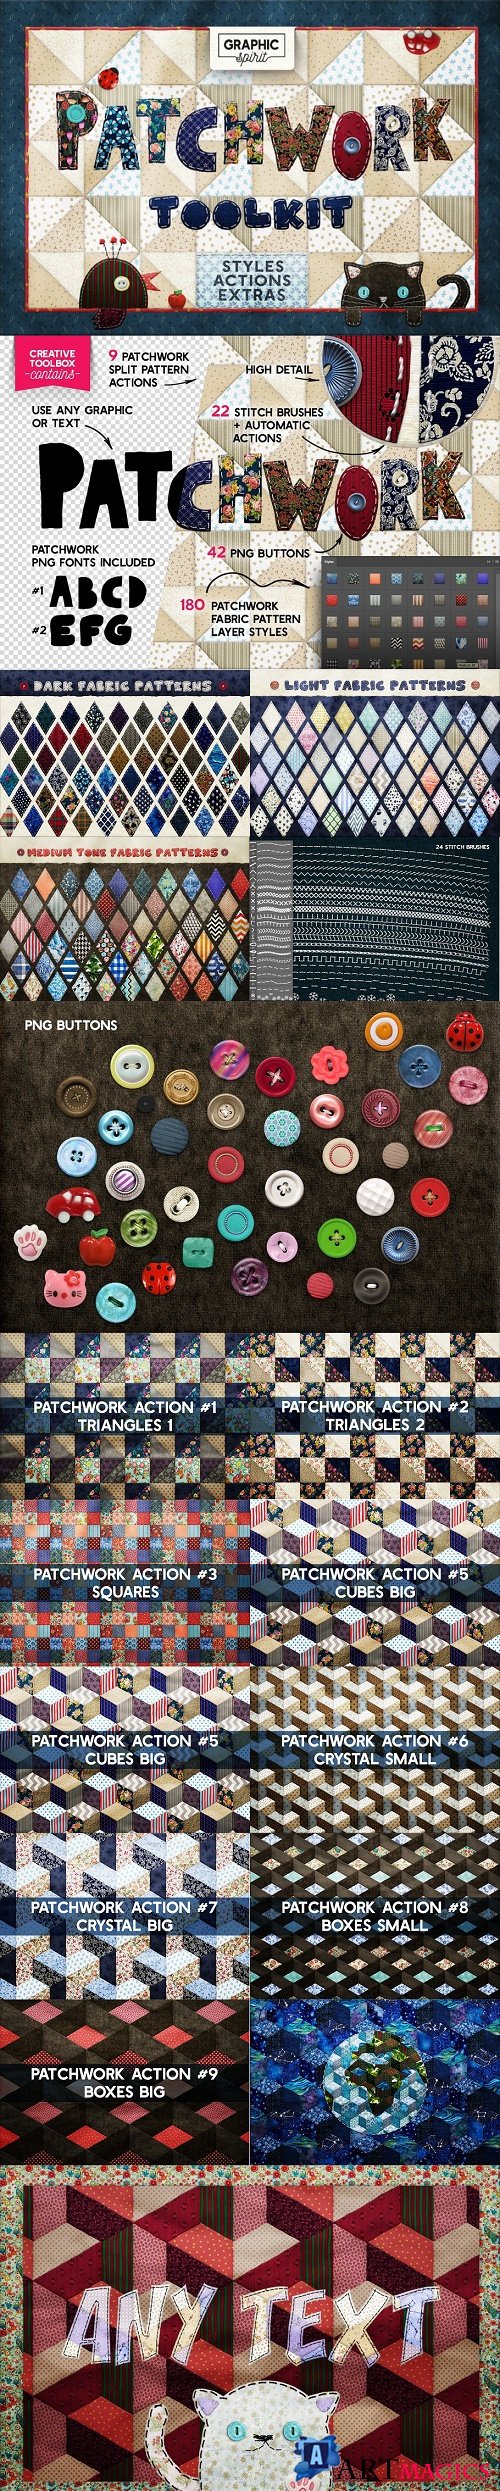 Patchwork Effect Photoshop Toolkit - 2489840